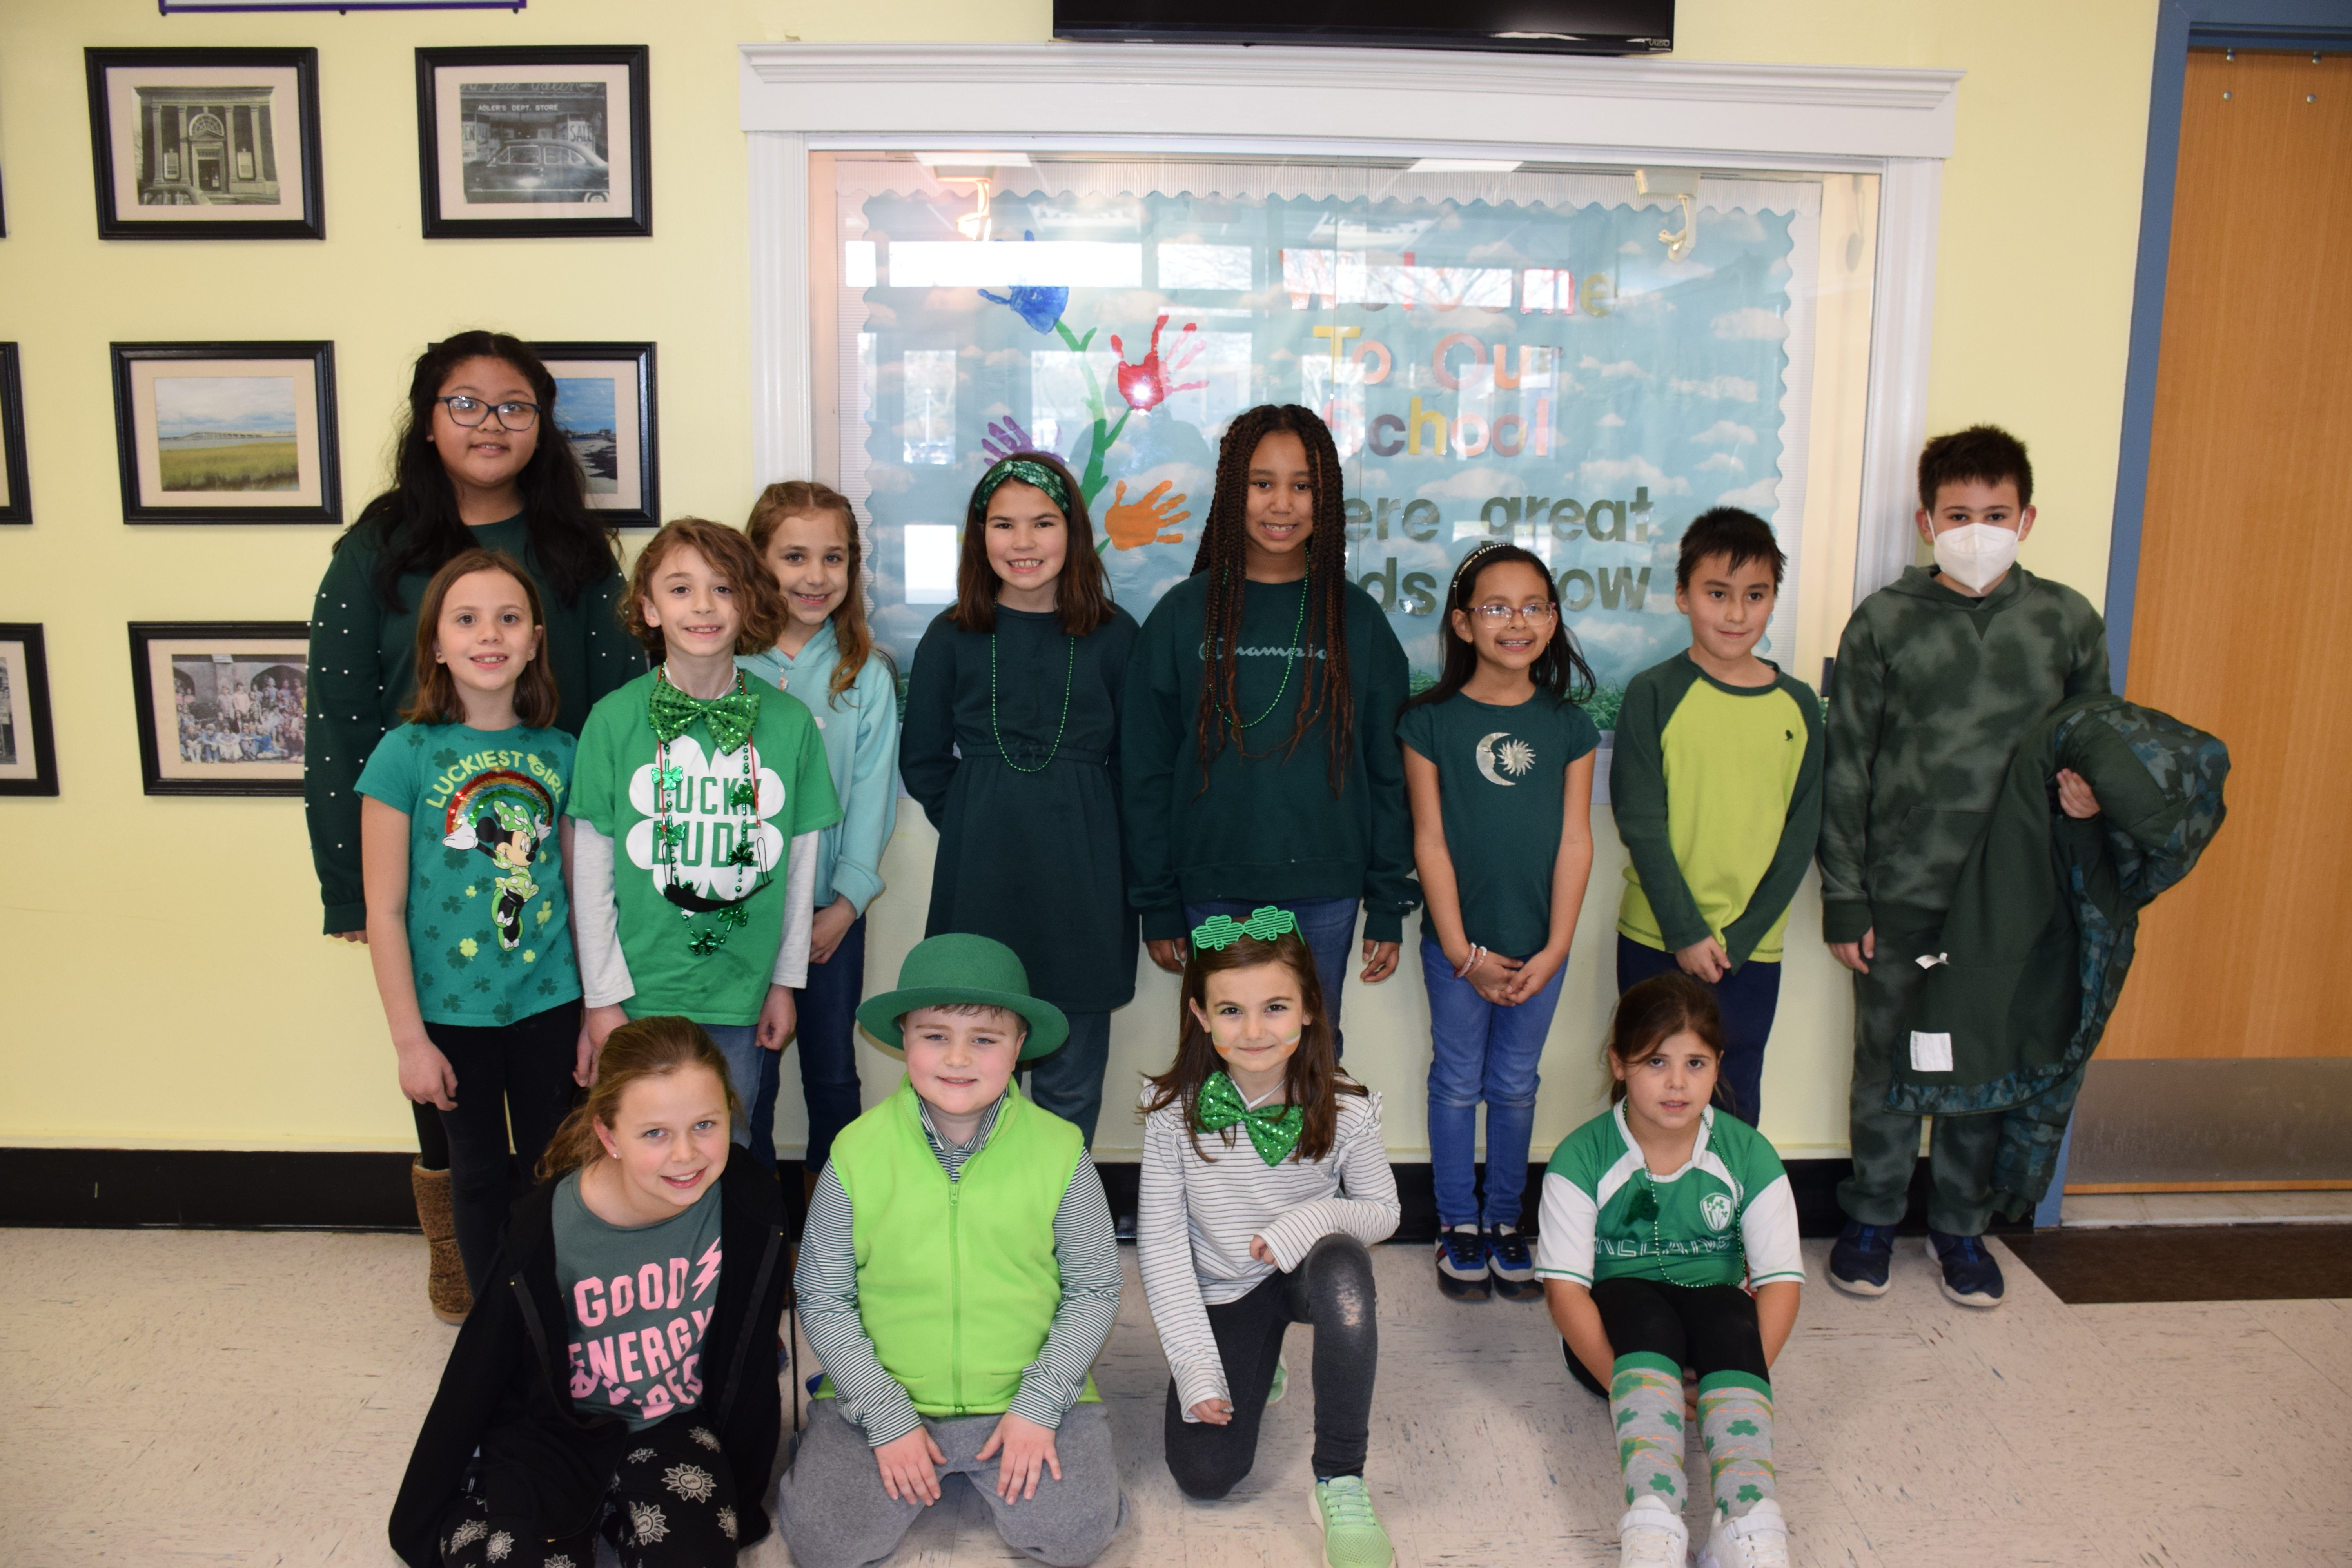 Hampton Bays Elementary School’s community service club, K-Kids, recently donated $500 to the Ronald McDonald House as part of a St. Patrick’s Day-themed fundraiser. To raise the funds, the students sold four-leaf clover necklaces during their lunch periods. The fundraiser is just one of several that the K-Kids have participated in this year. They also raised money for breast cancer and autism awareness. COURTESY HAMPTON BAYS SCHOOL DISTRICT